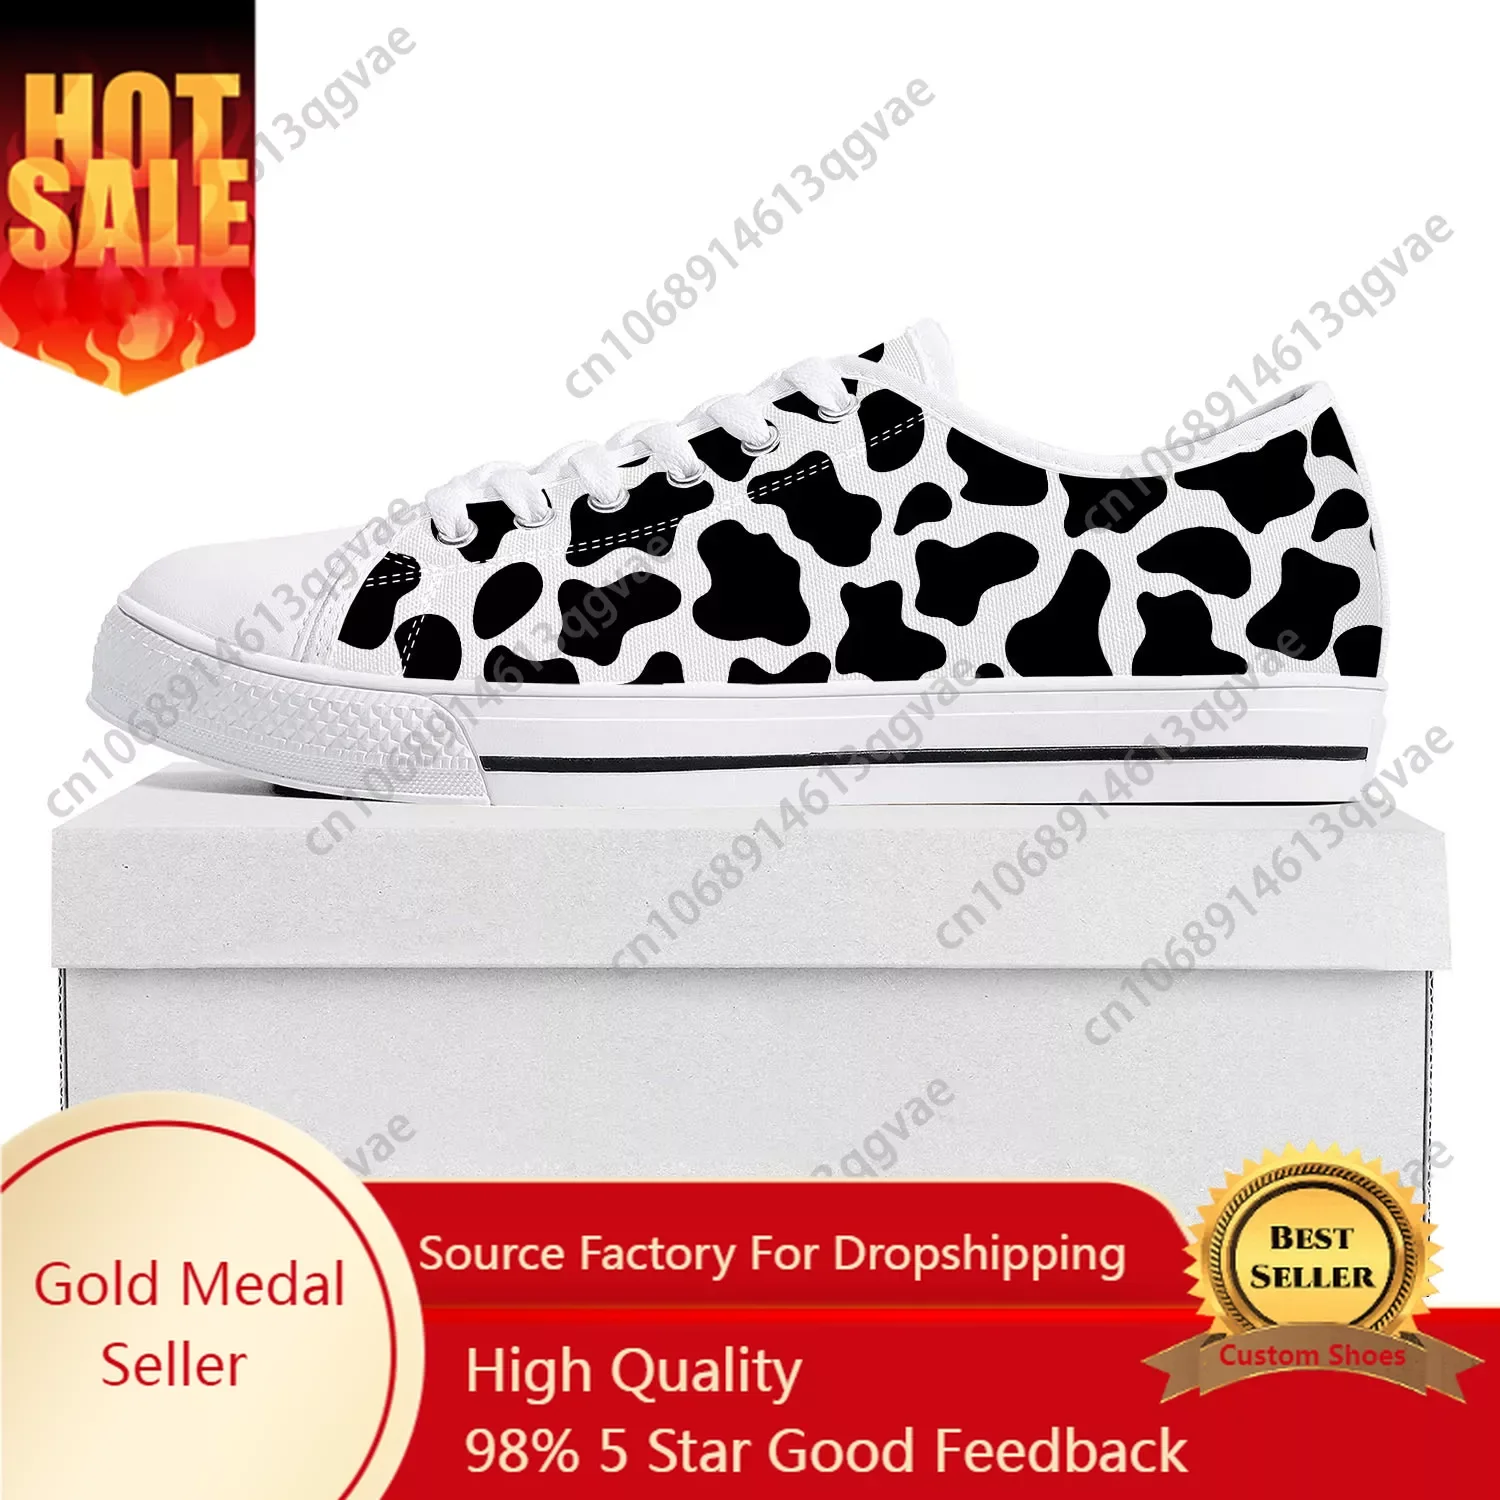 

Cow Print 3D Pattern Low Top High Quality Sneakers Mens Womens Teenager Canvas Sneaker Black White Printed Couple Custom Shoe